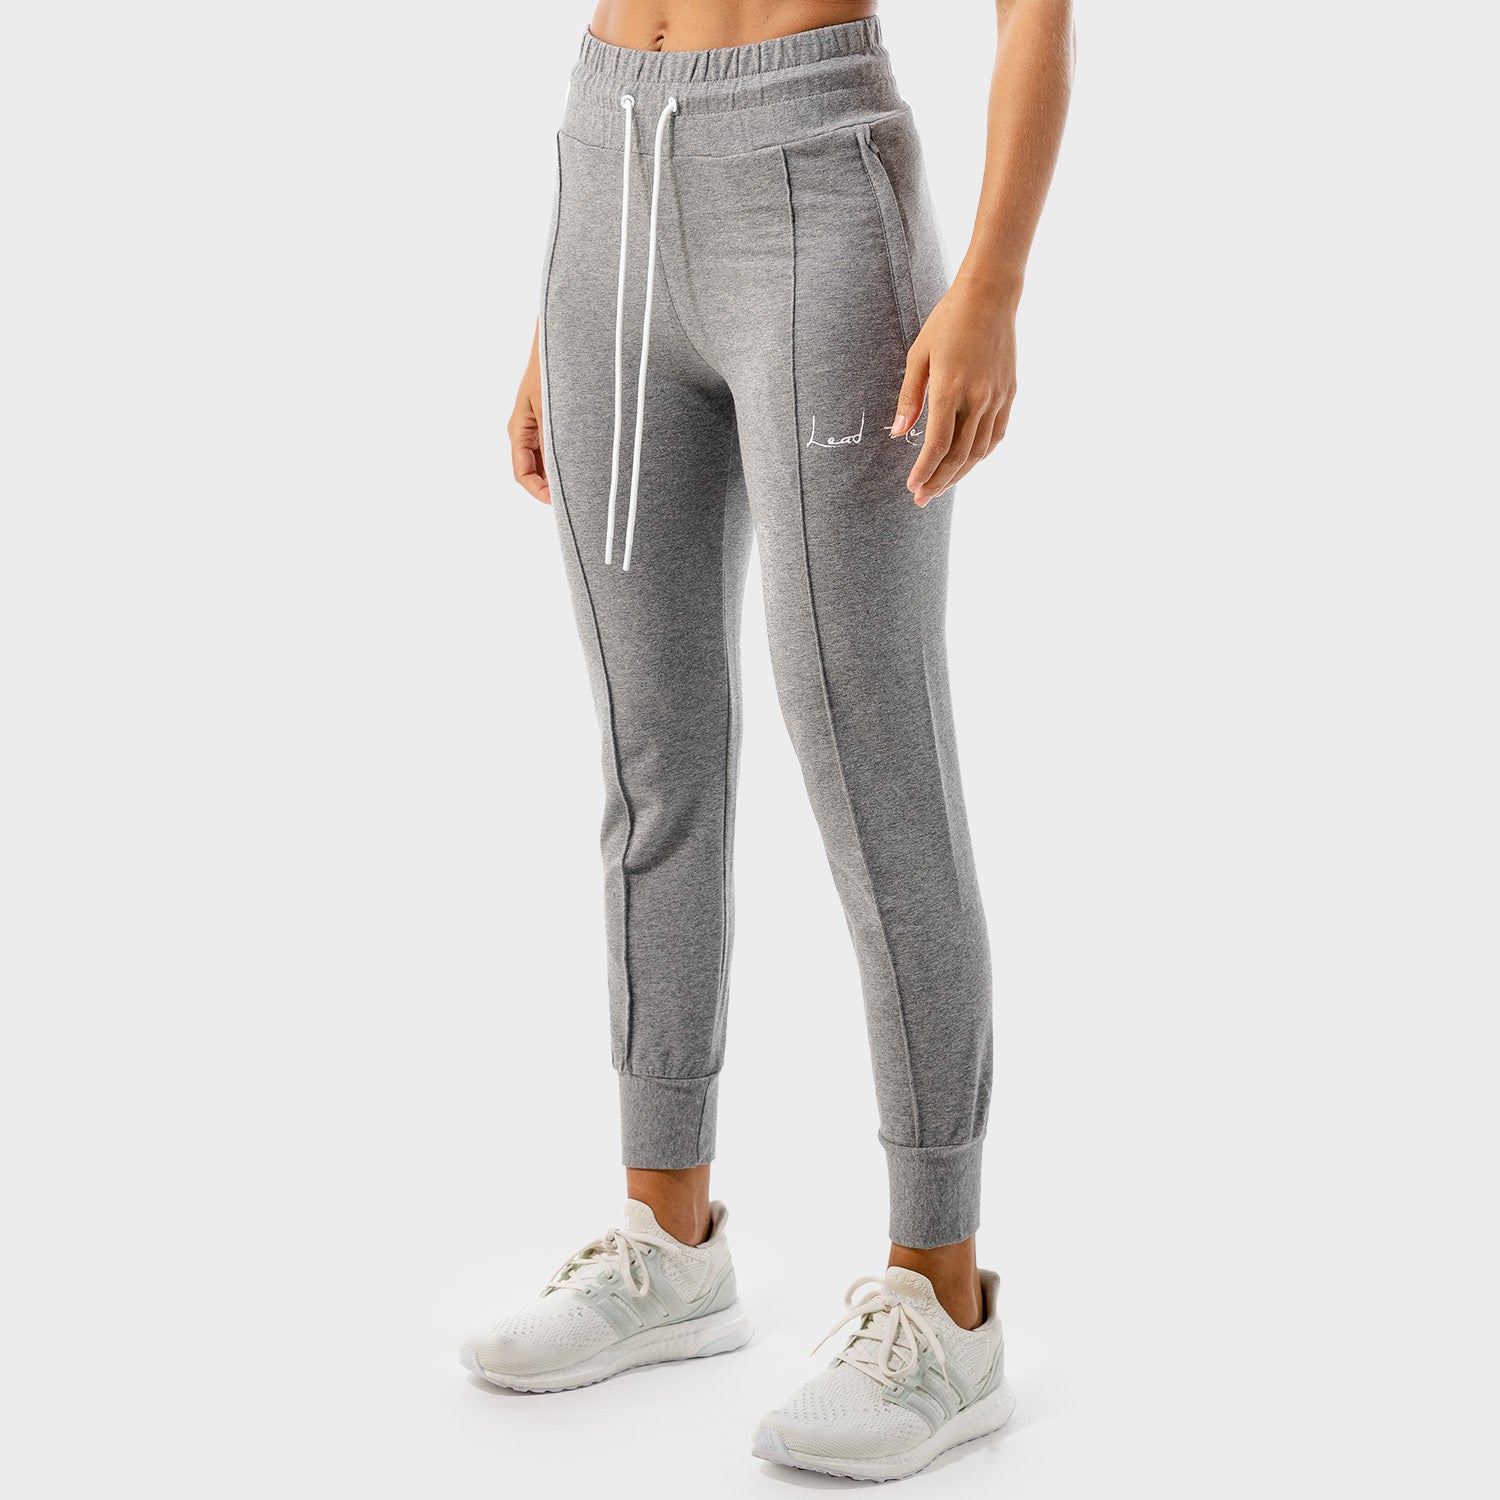 squatwolf-gym-pants-for-women-vibe-joggers-grey-marl-workout-clothes